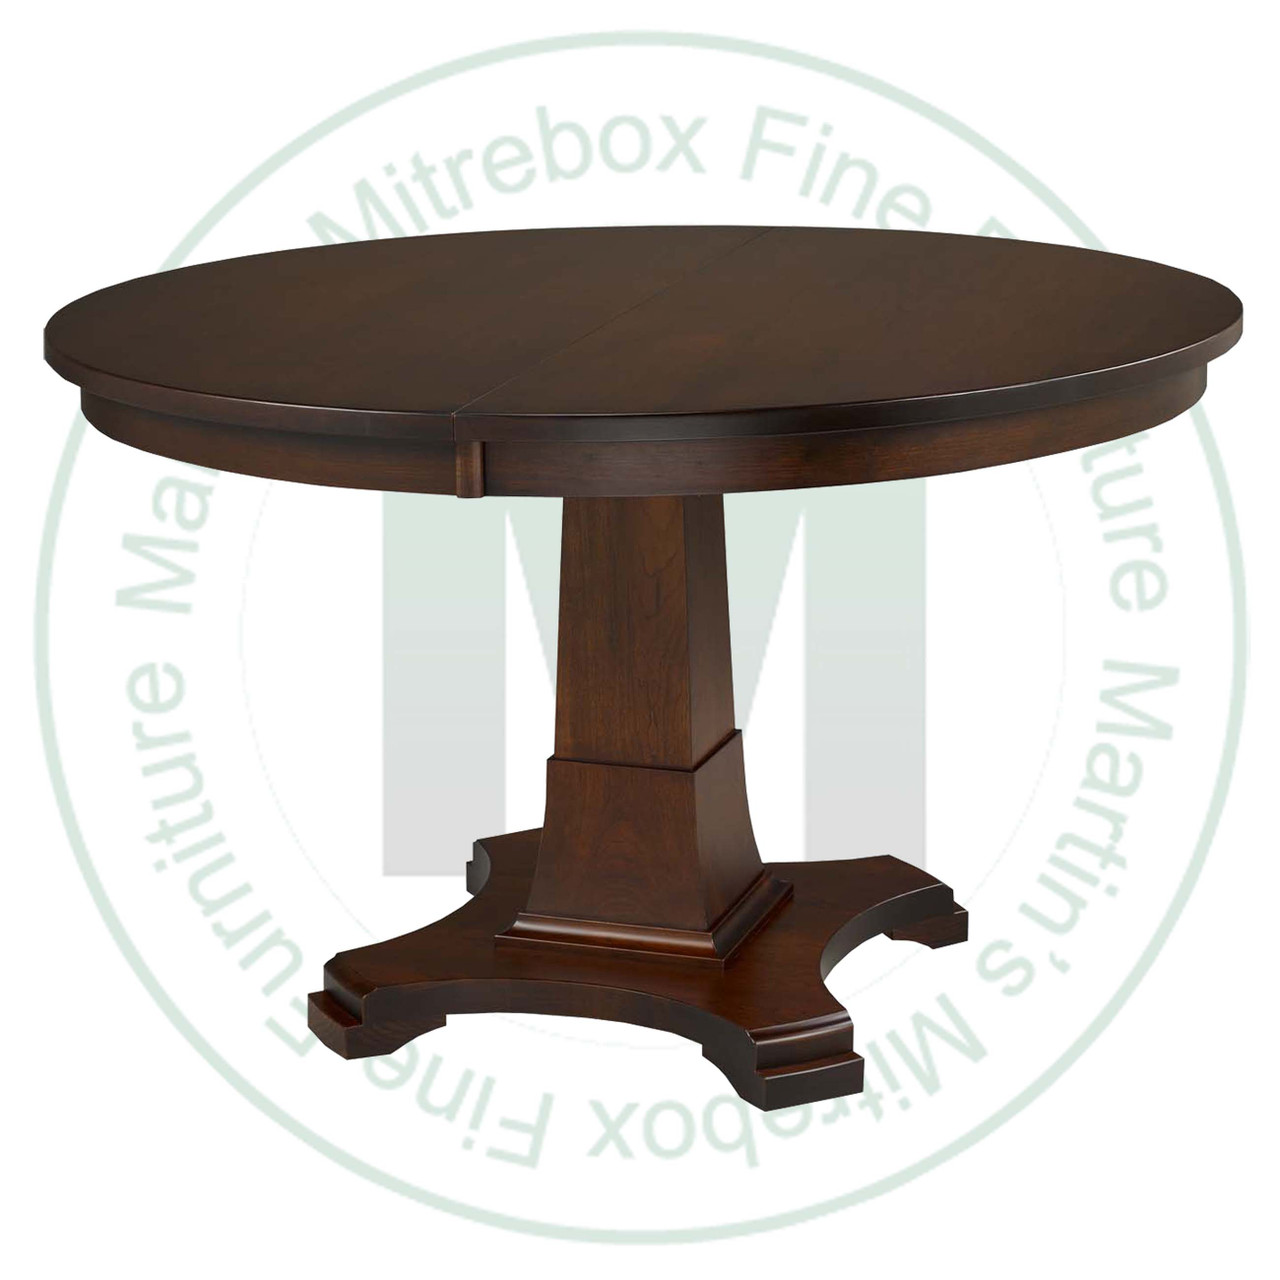 Maple Abbey Single Pedestal Table 48''D x 48''W x 30''H Round Solid Table. Table Has 1'' Thick Top